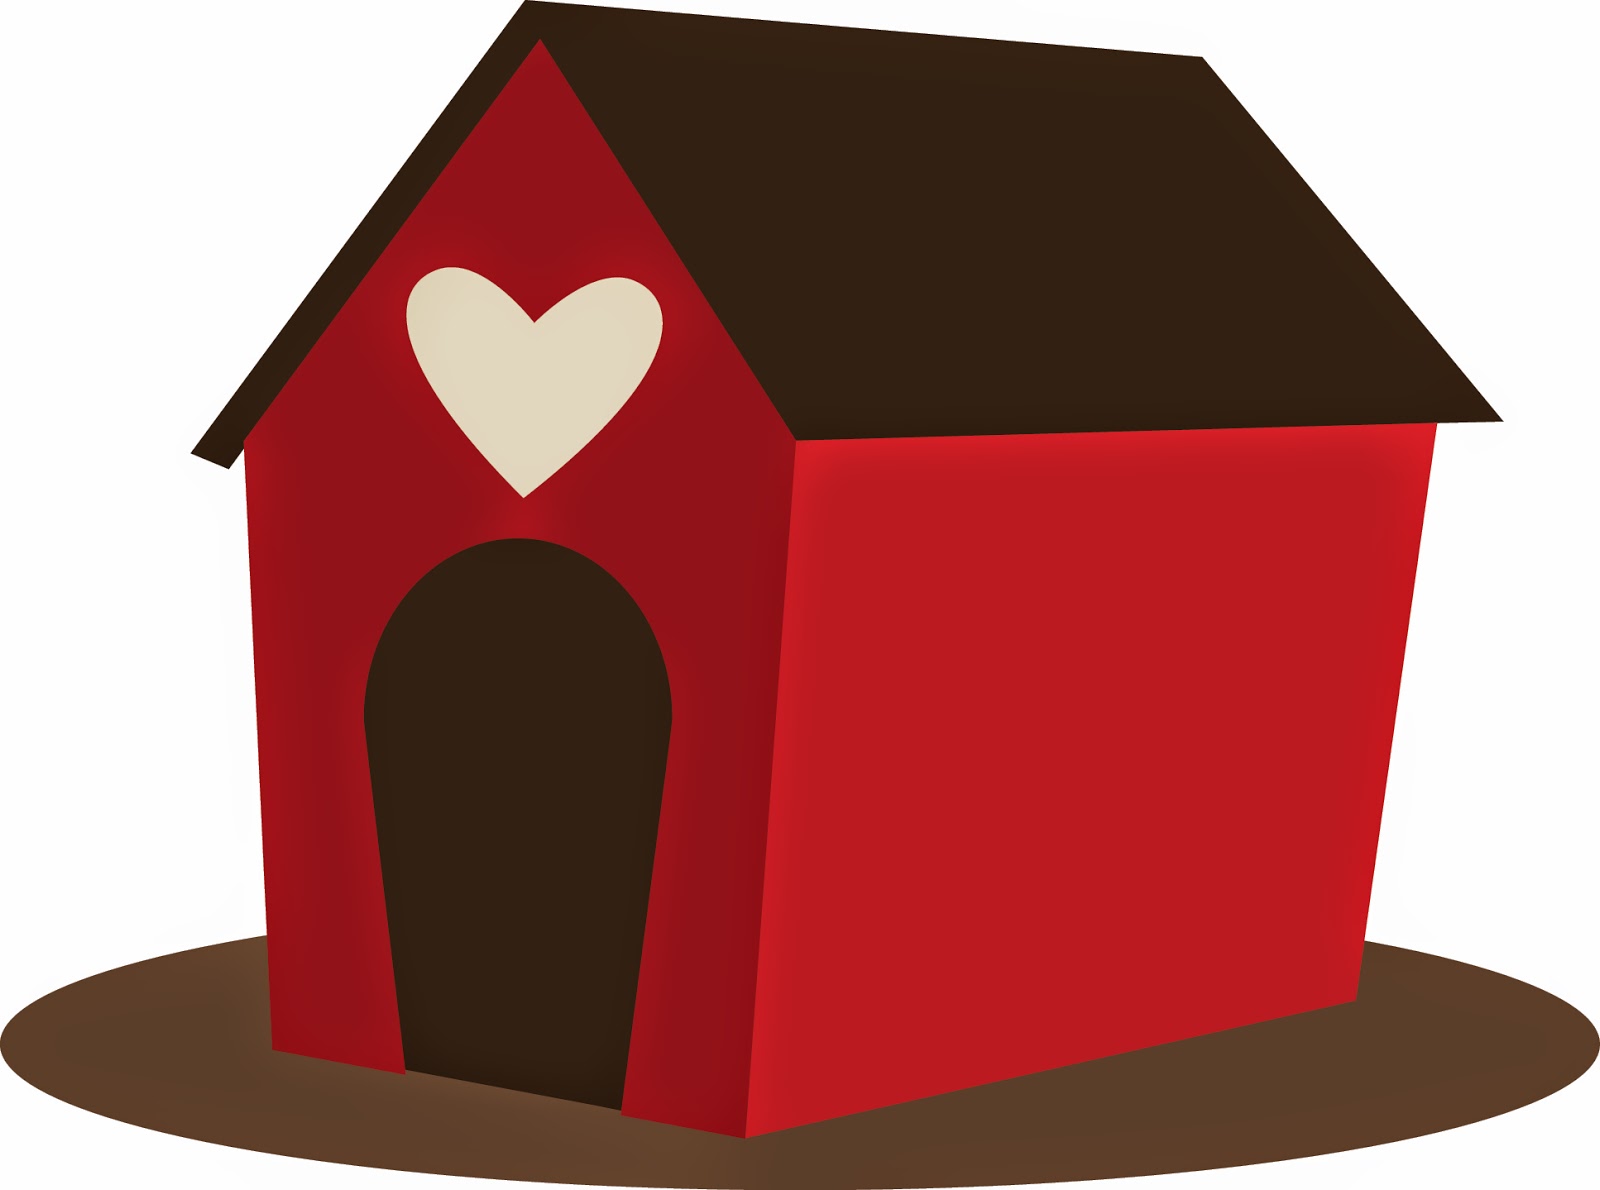 Dog House Clipart | Free download on ClipArtMag